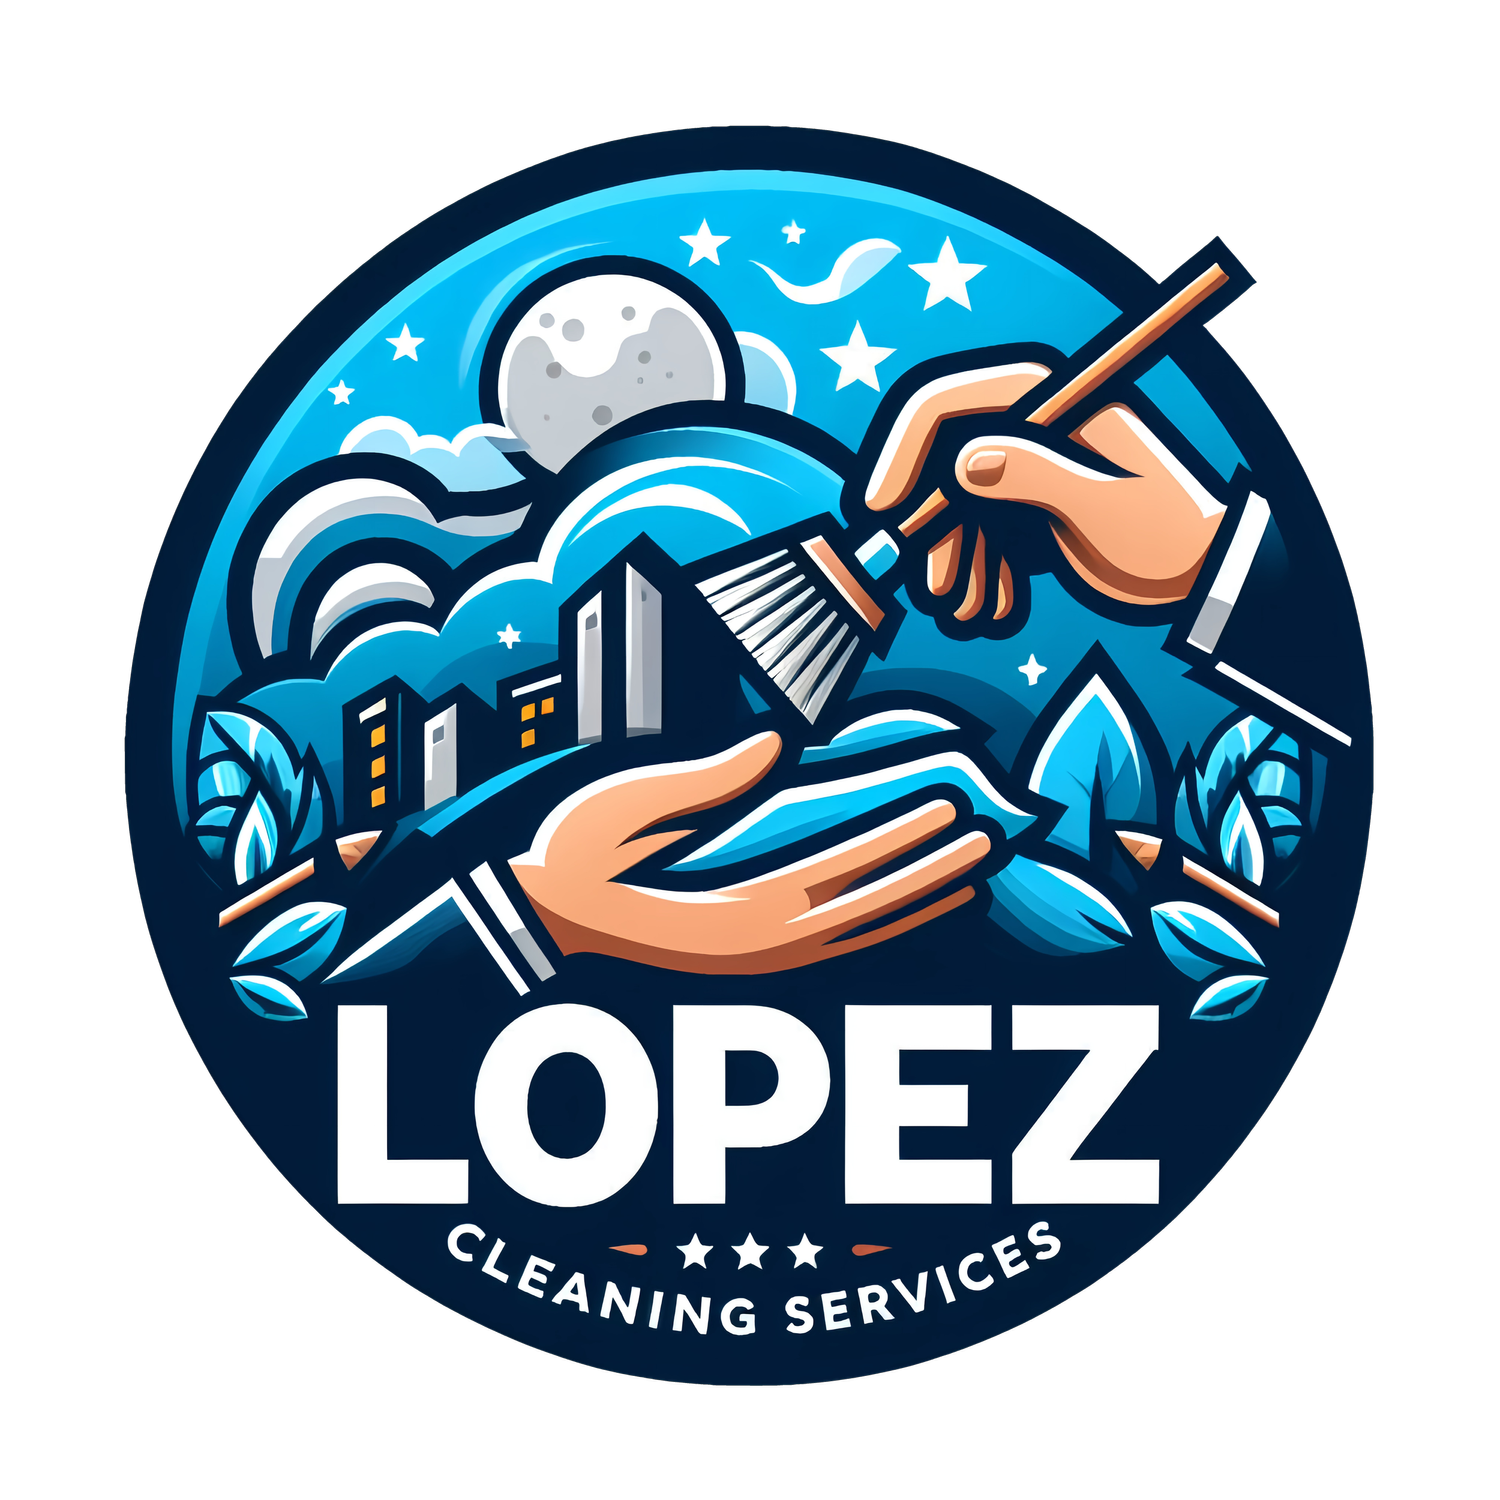 Lopez Cleaning Service | Commercial Cleaning Services in Broward